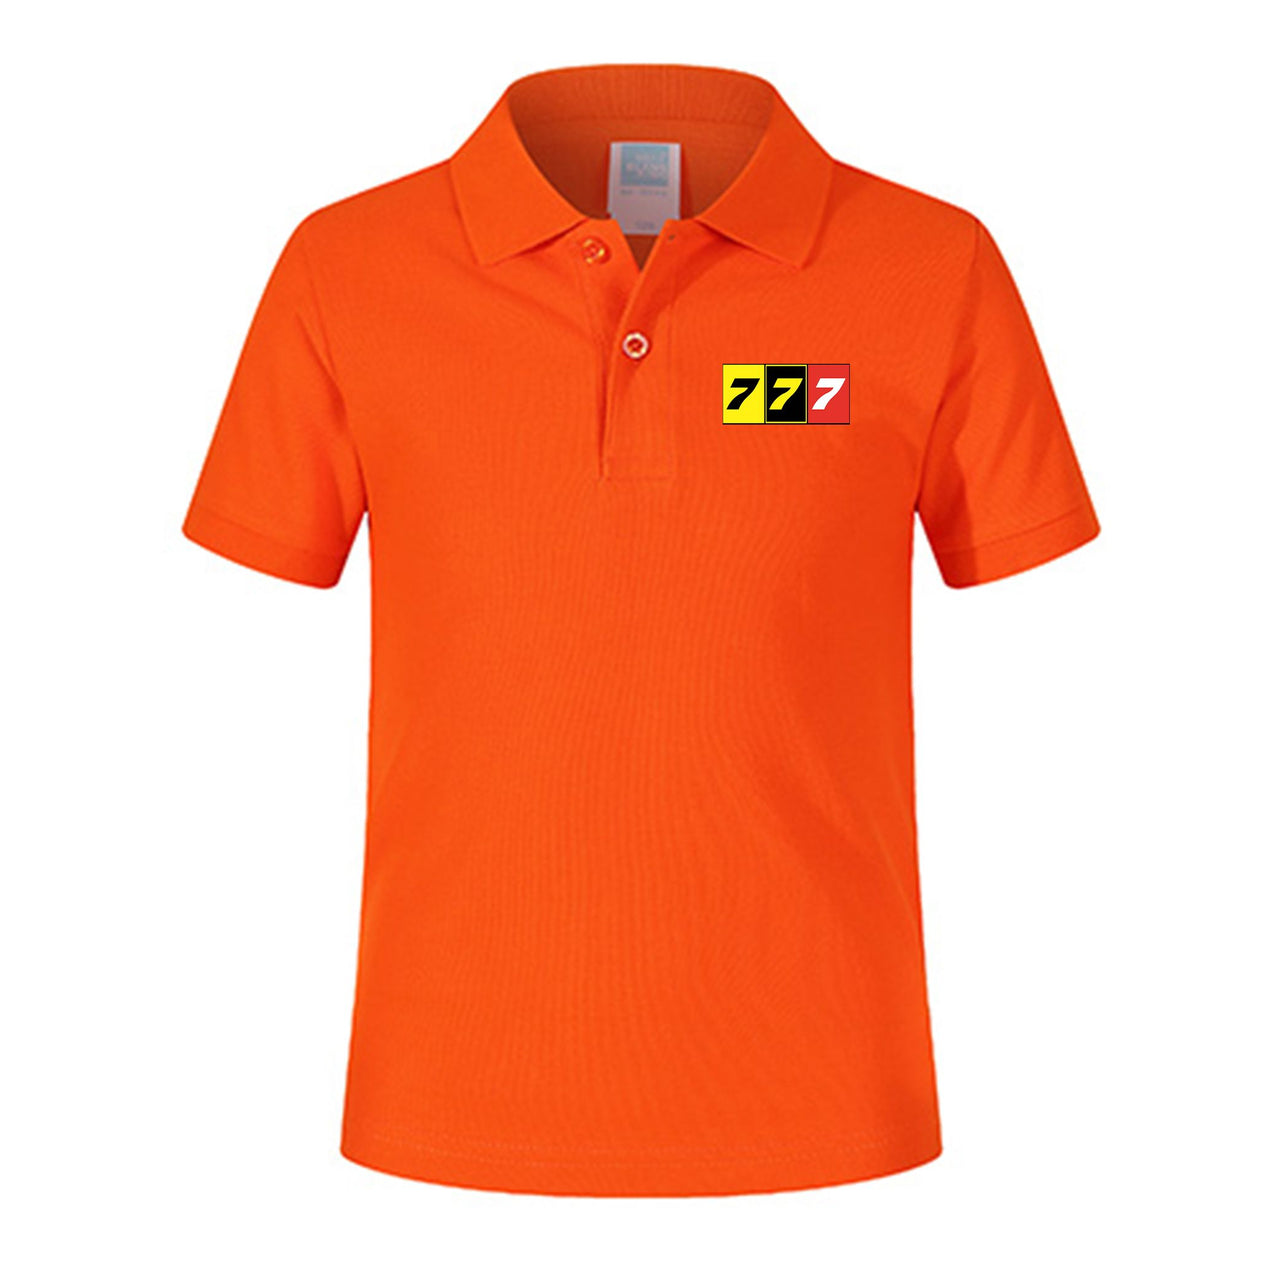 Flat Colourful 777 Designed Children Polo T-Shirts